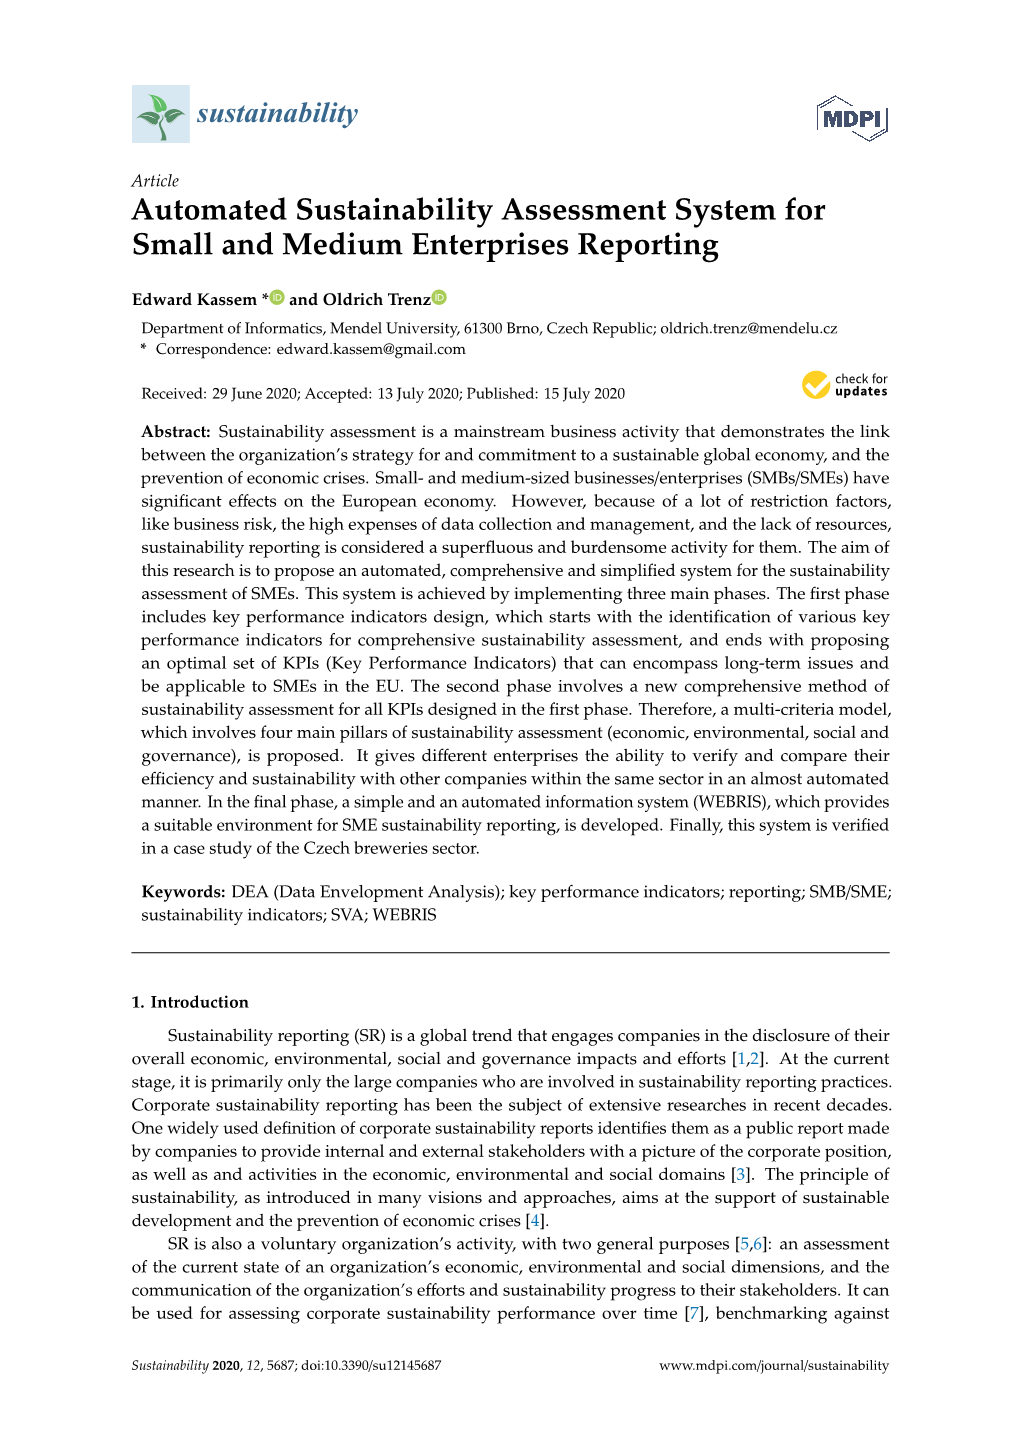 Automated Sustainability Assessment System for Small and Medium Enterprises Reporting